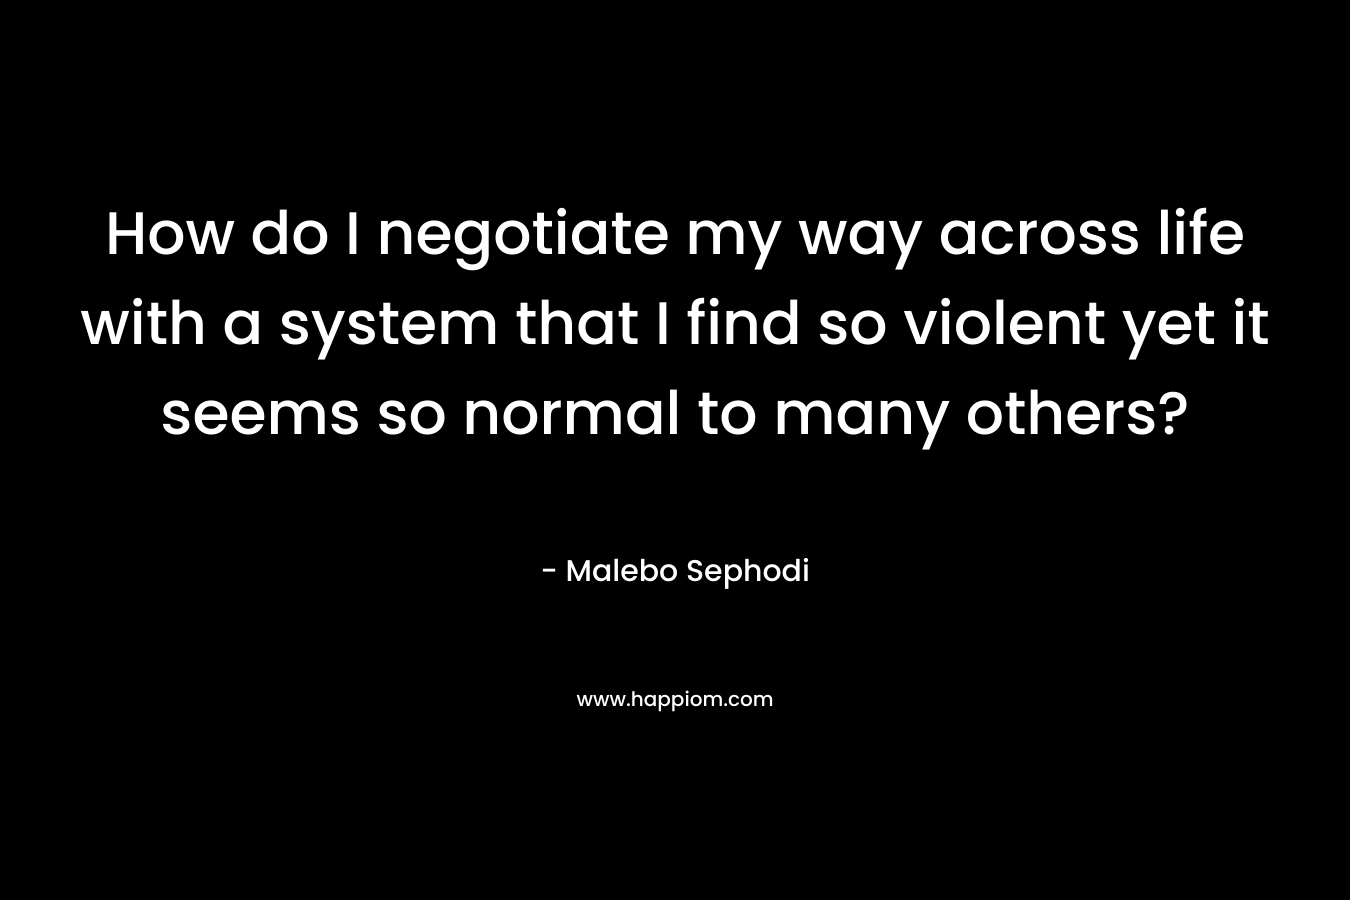 How do I negotiate my way across life with a system that I find so violent yet it seems so normal to many others? – Malebo Sephodi